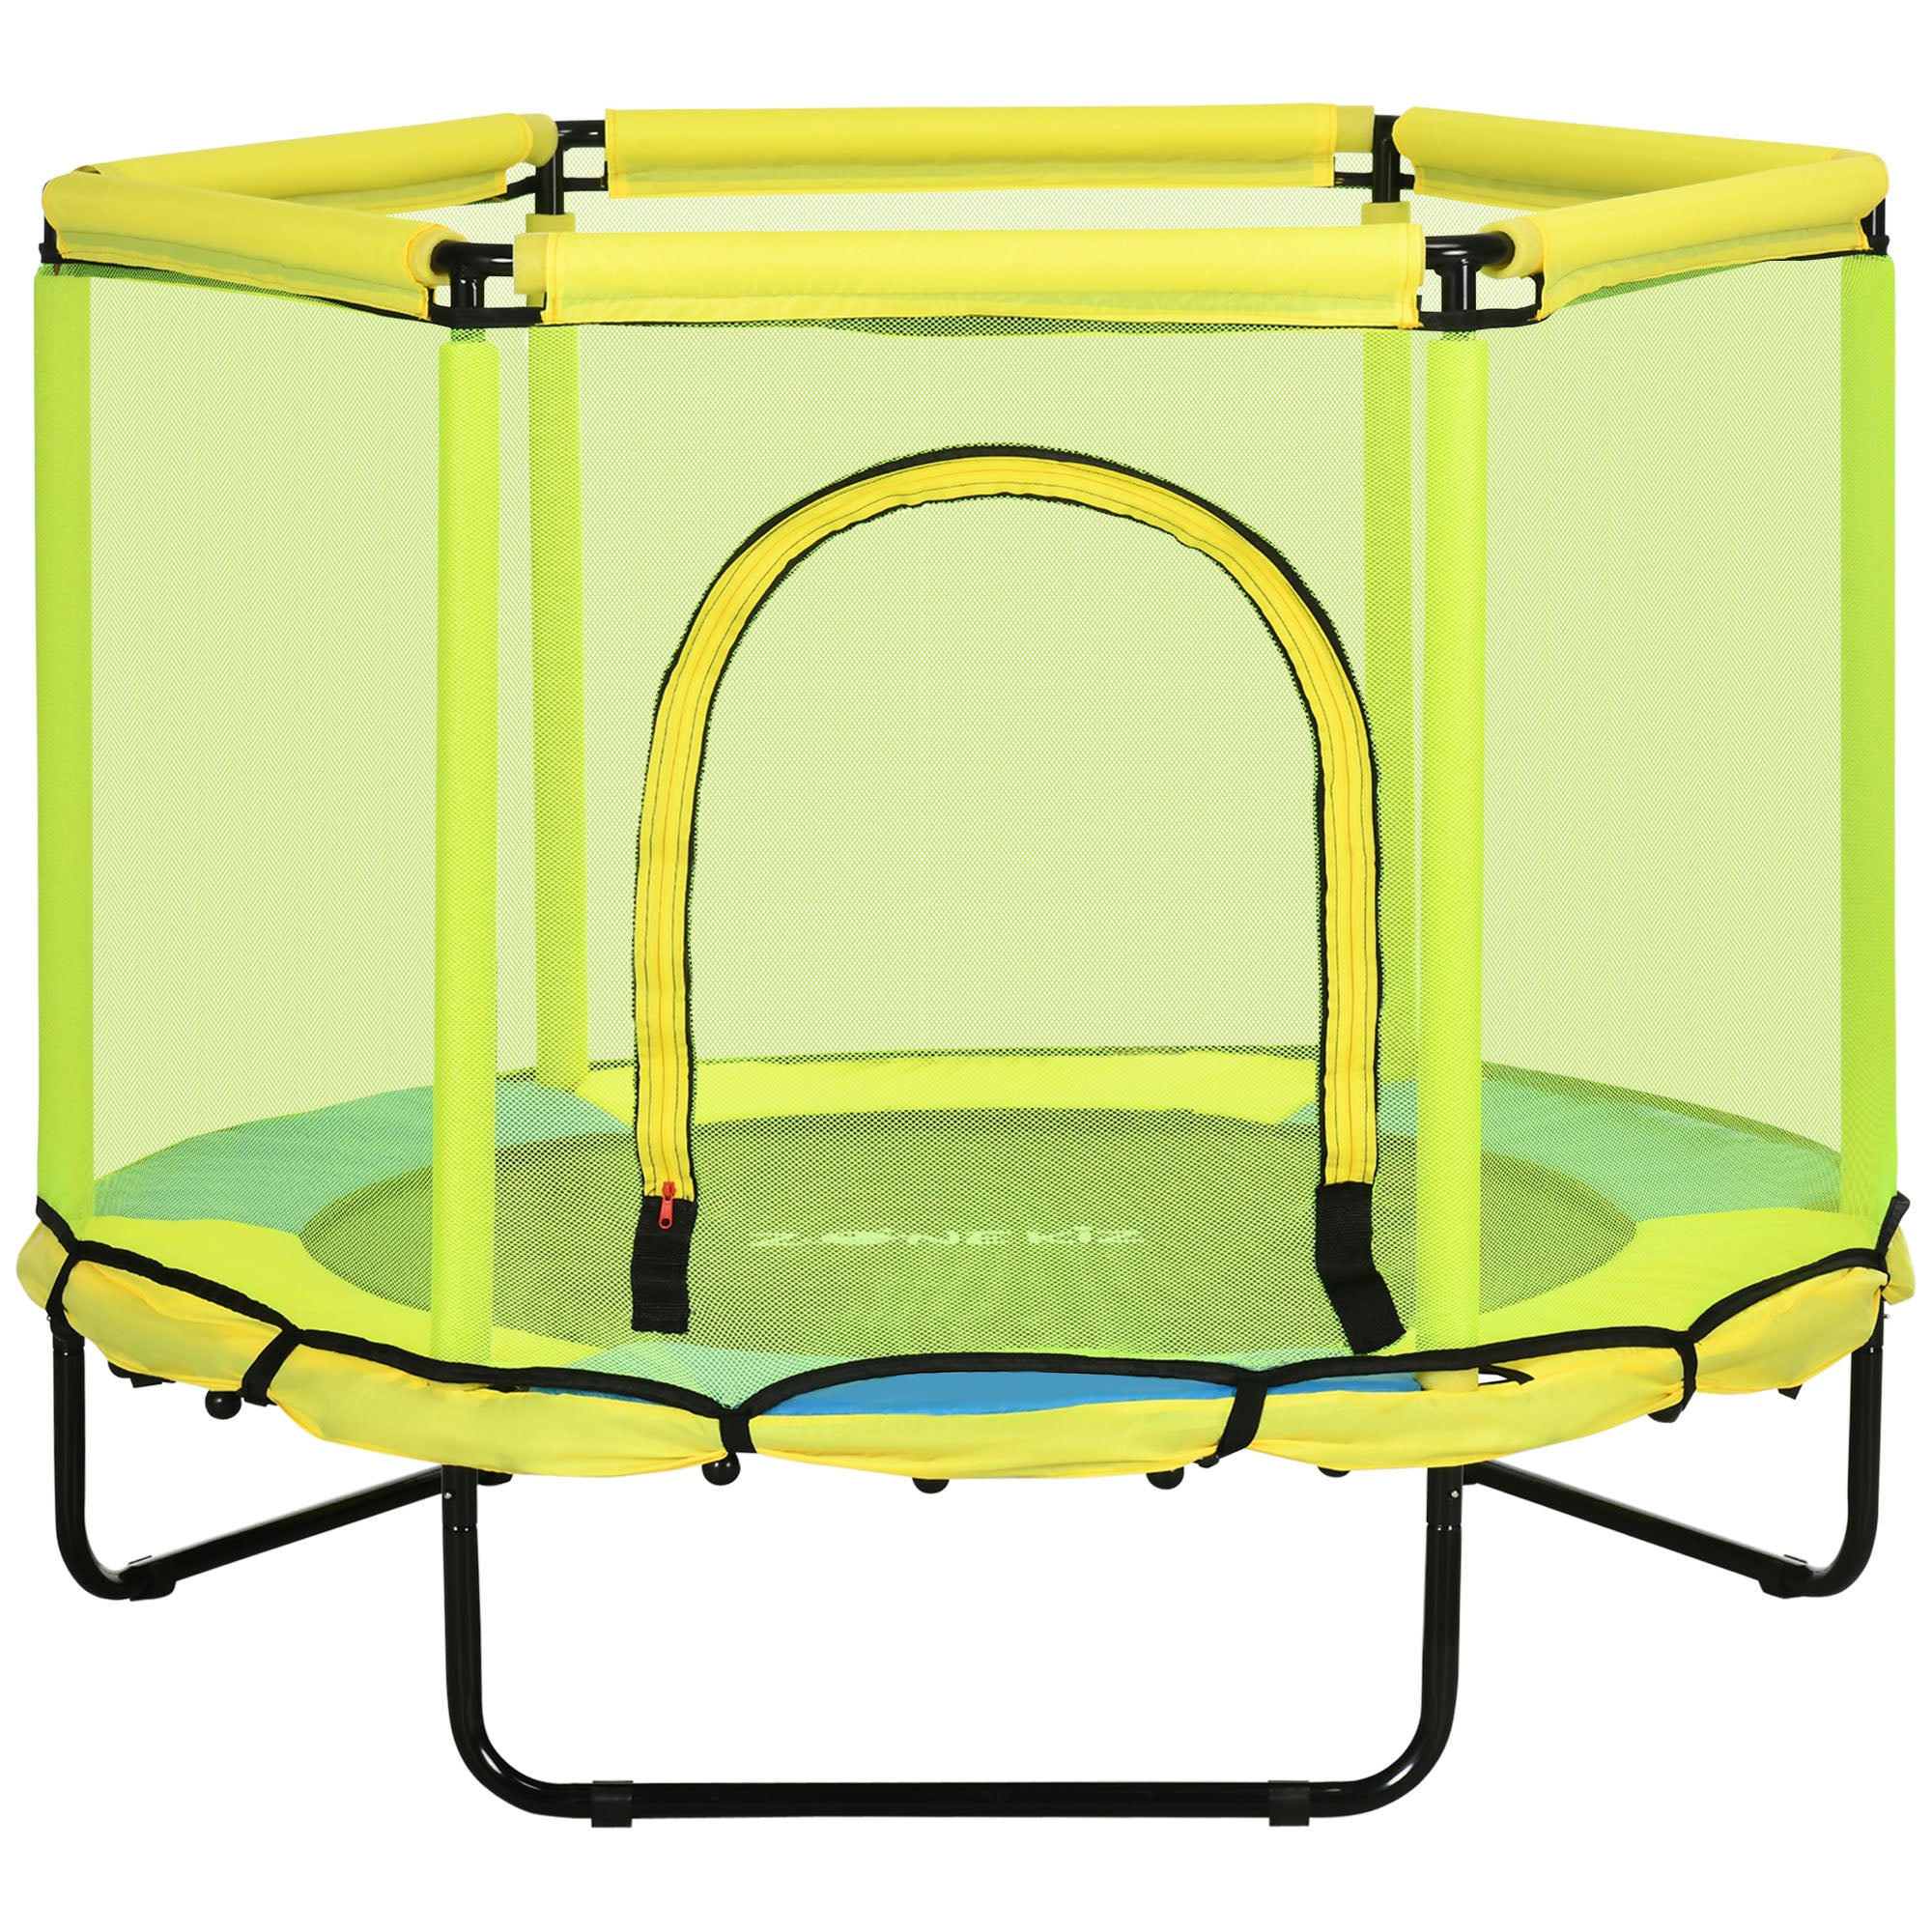 ZONEKIZ 4.6FT Kids Trampoline with Enclosure Safety Net for 1-6 Years Yellow  | TJ Hughes